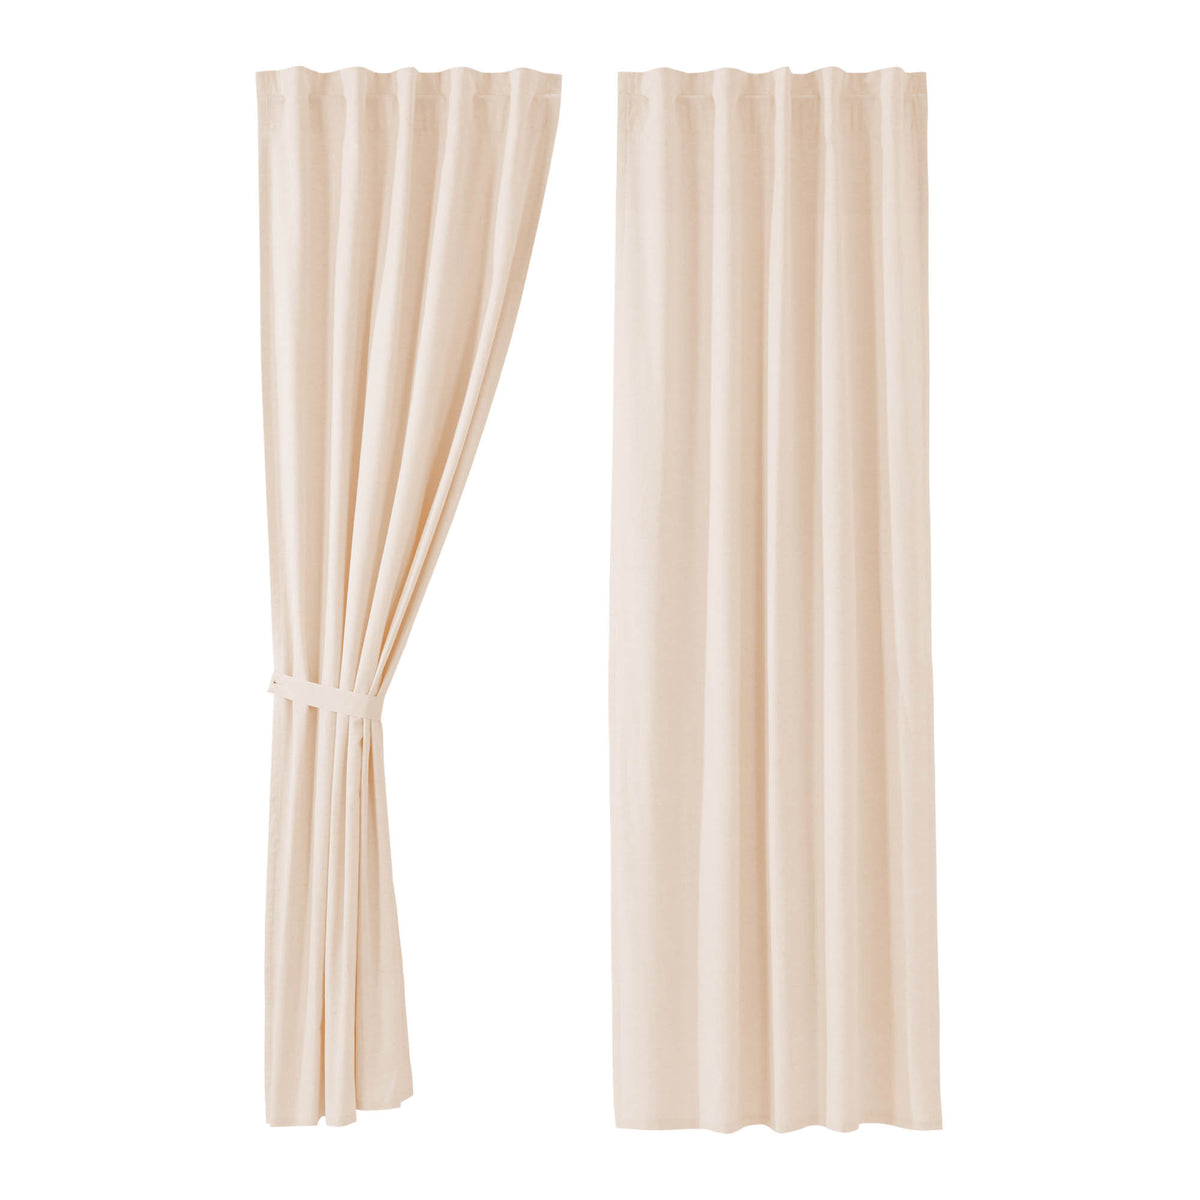 Simple Life Flax Natural Panel Set of 2 96x40